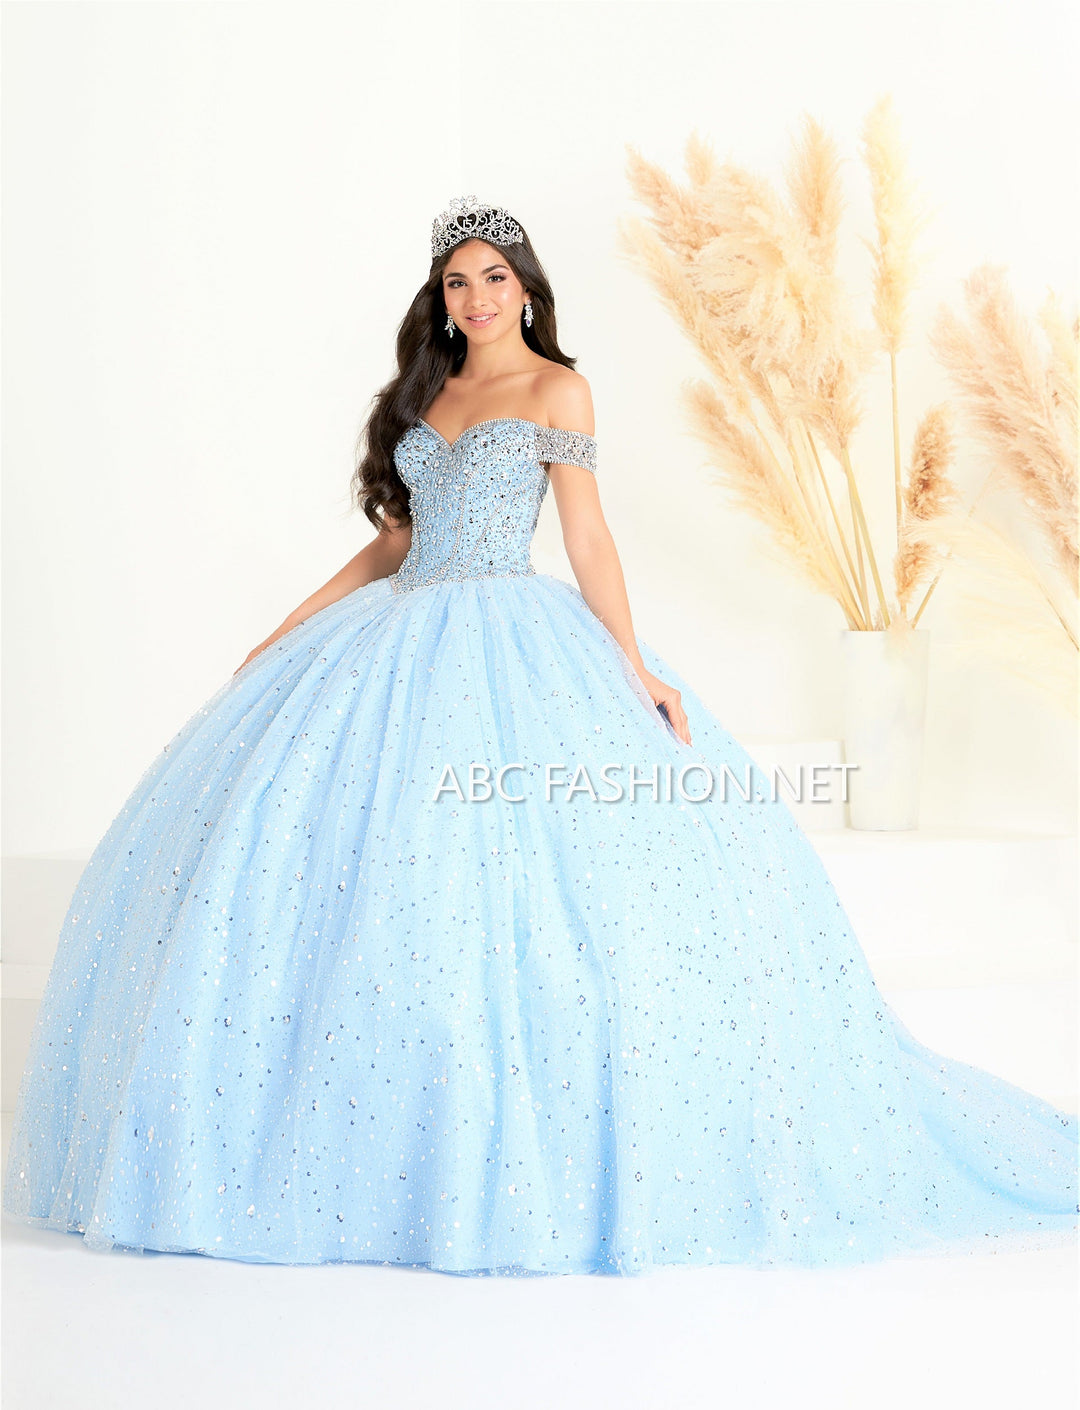 Hooded Cape Quinceanera Dress by Fiesta Gowns 56452C